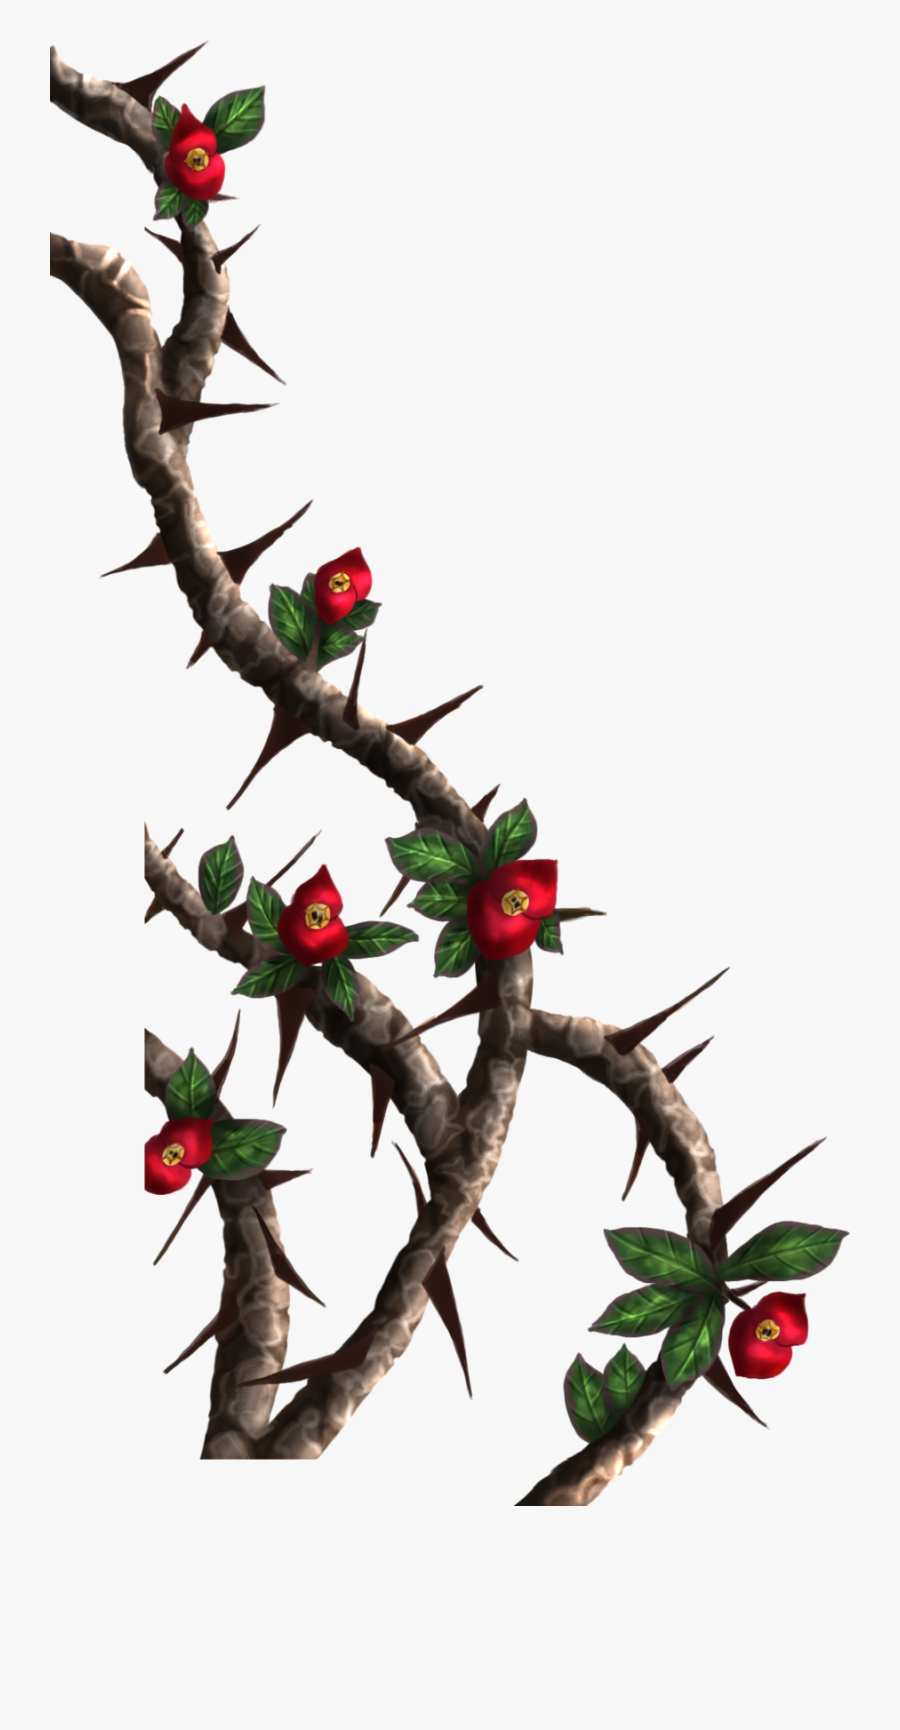 Espinas Thorns Freetoedit - Roses With Thorns Png, Transparent Clipart